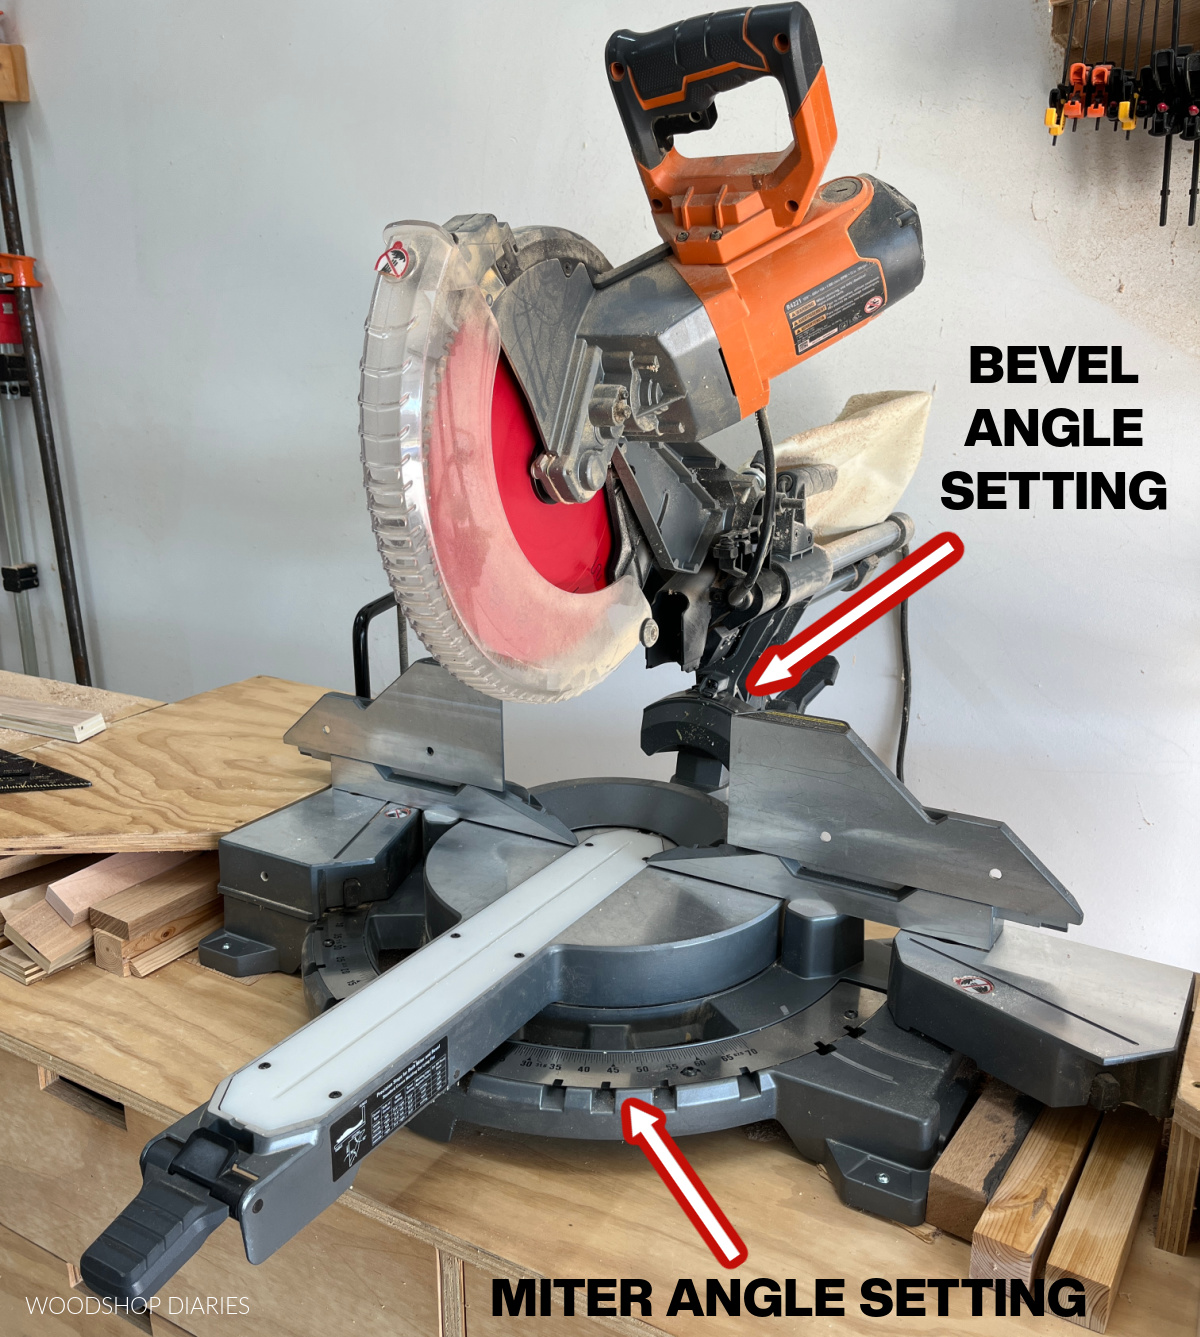 Miter saw with arrows pointing to miter and bevel adjustment settings